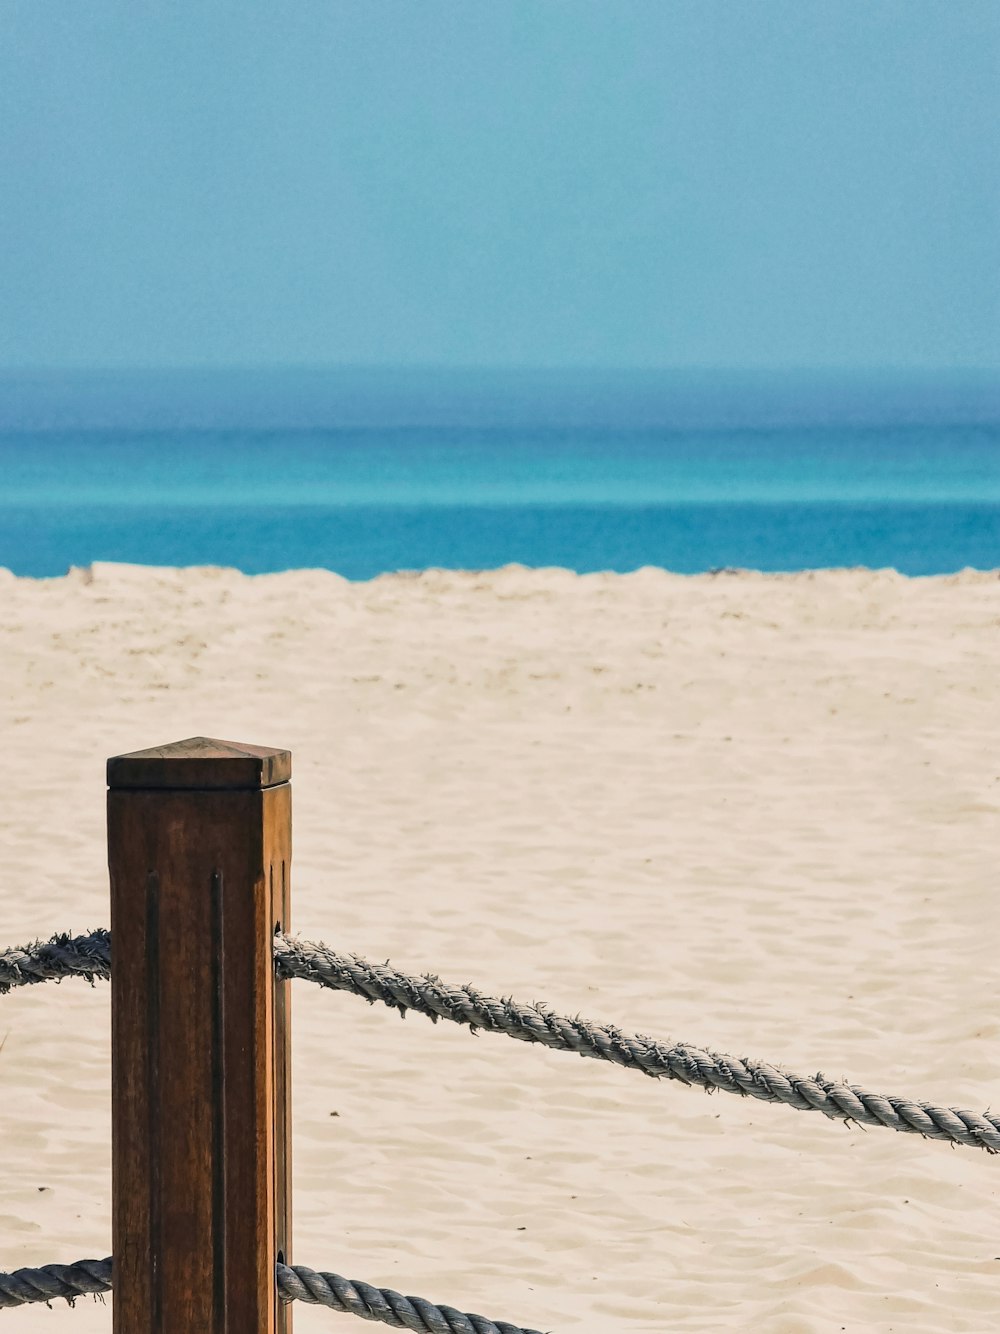 A wooden post on a beach next to a rope fence photo – Free Soul beach - abu  dhabi - united arab emirates Image on Unsplash